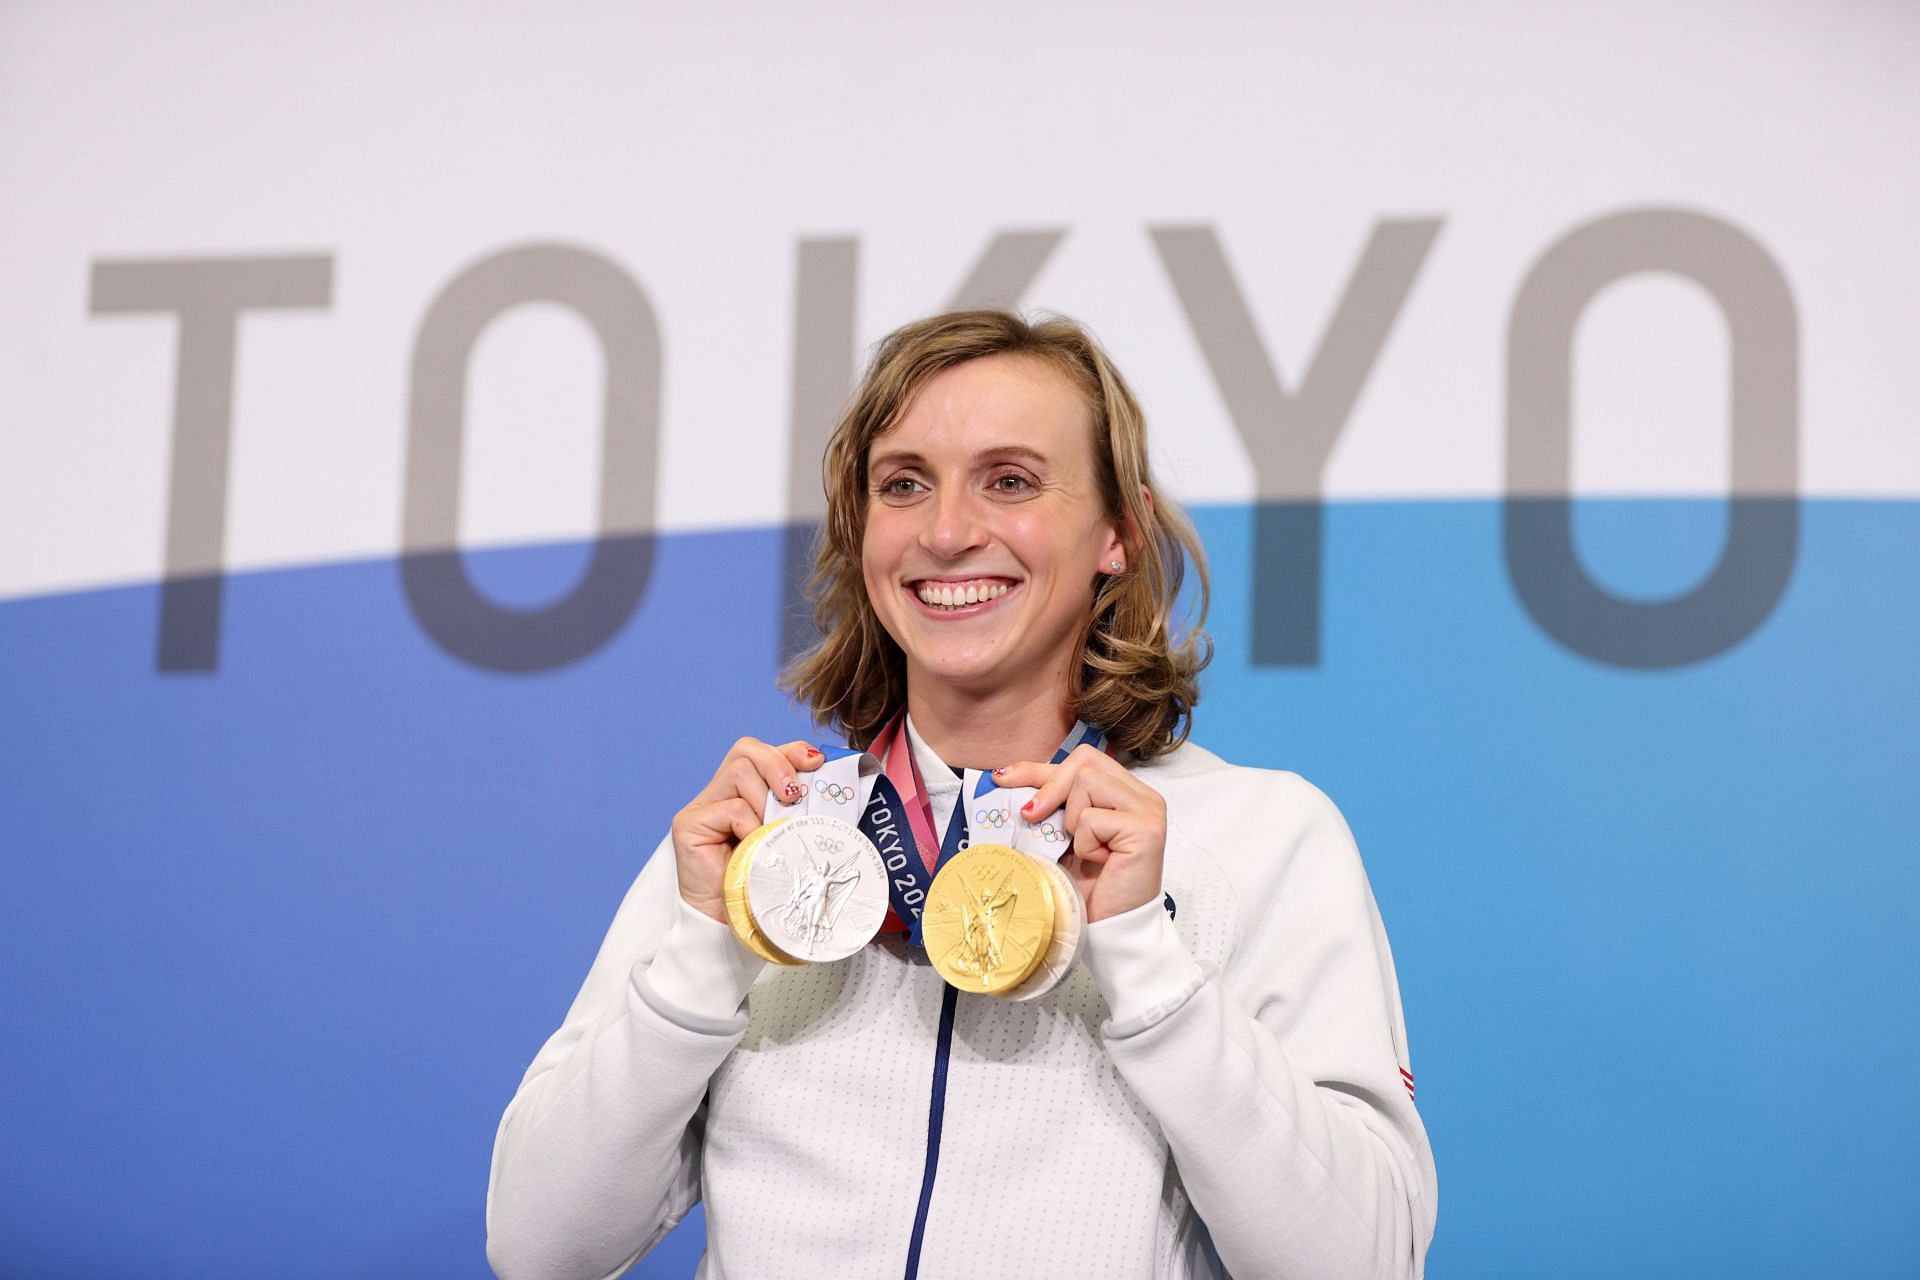 Katie Ledecky's Olympics debut, medals, and more